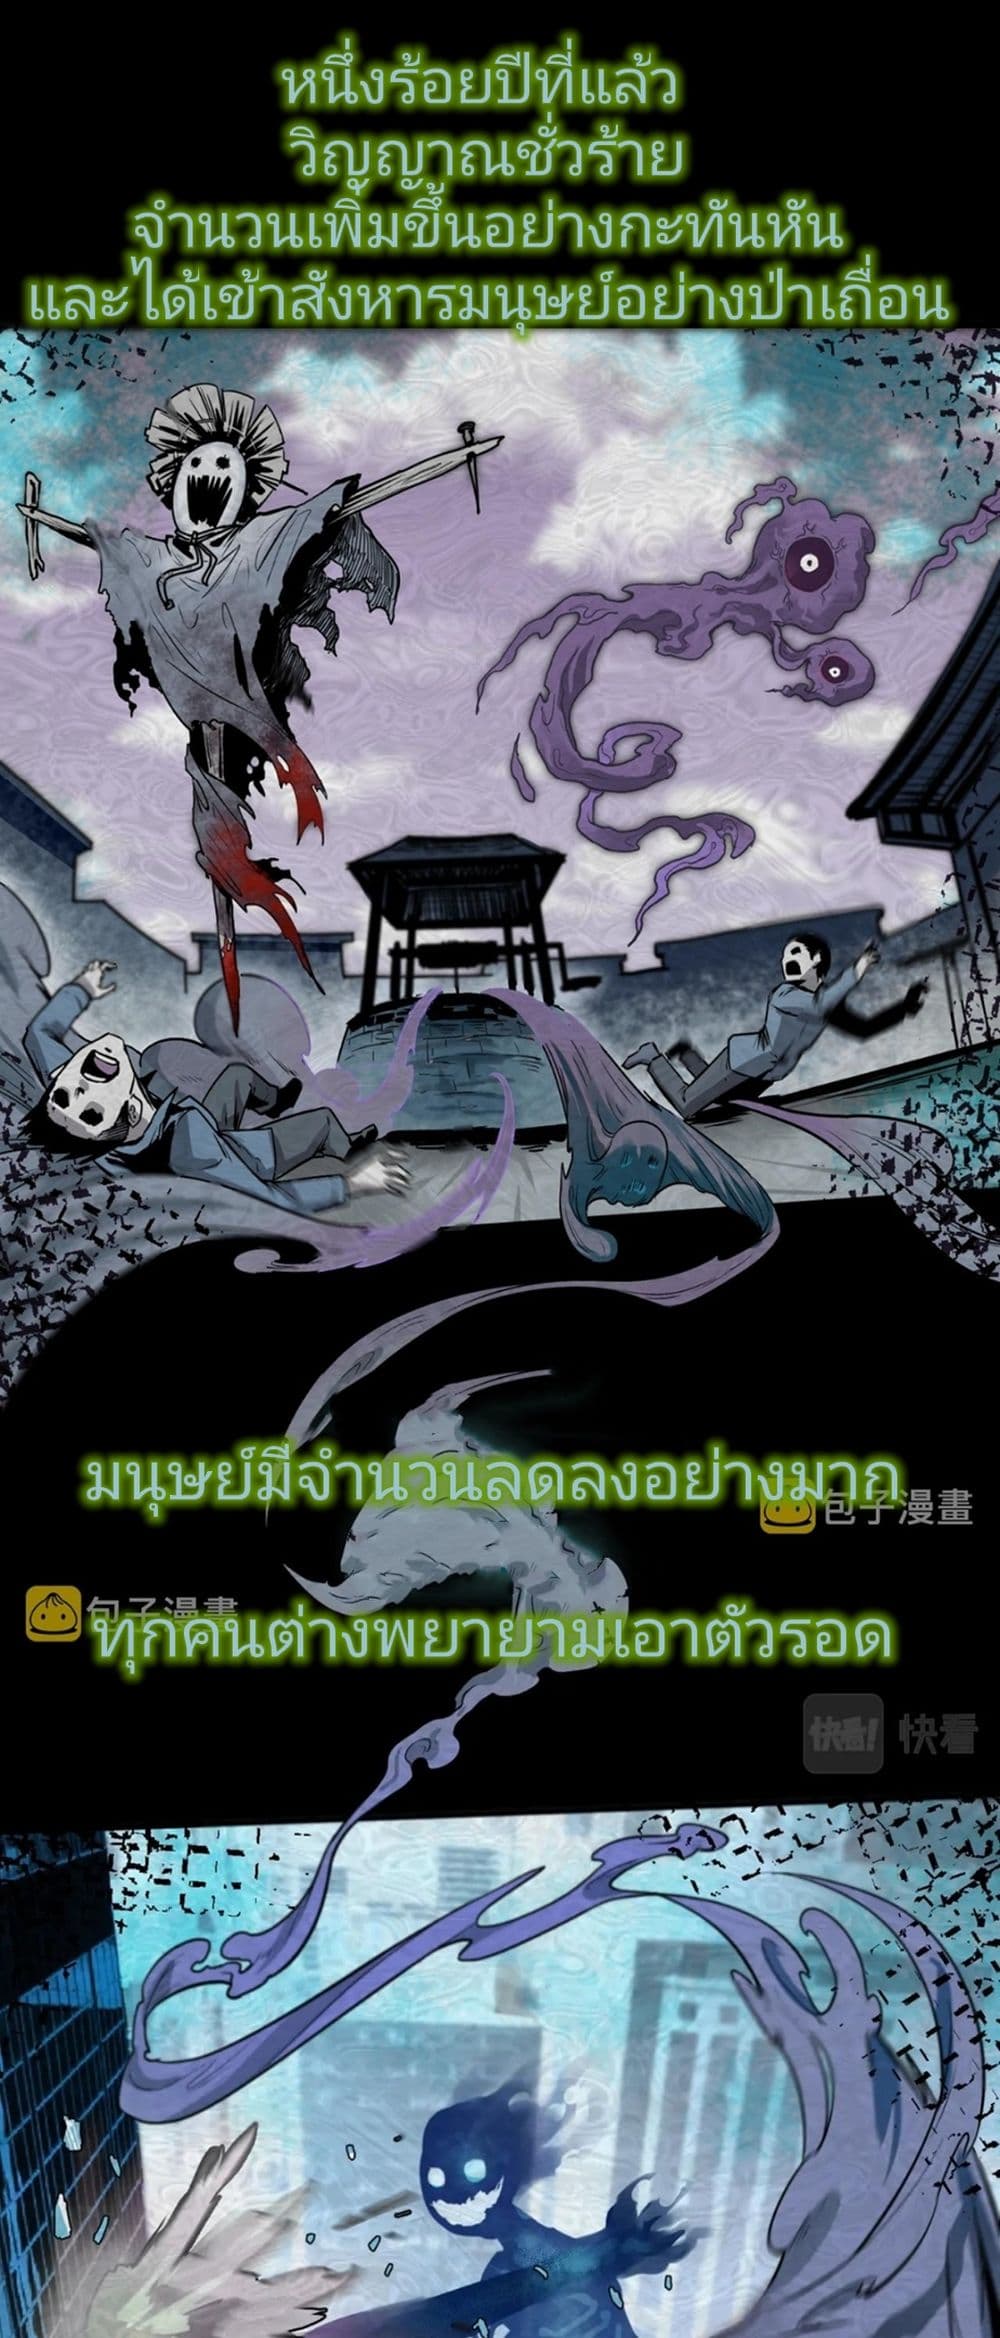 The Age of Ghost Spirits à¸à¸­à¸à¸à¸µà¹ 1 (3)